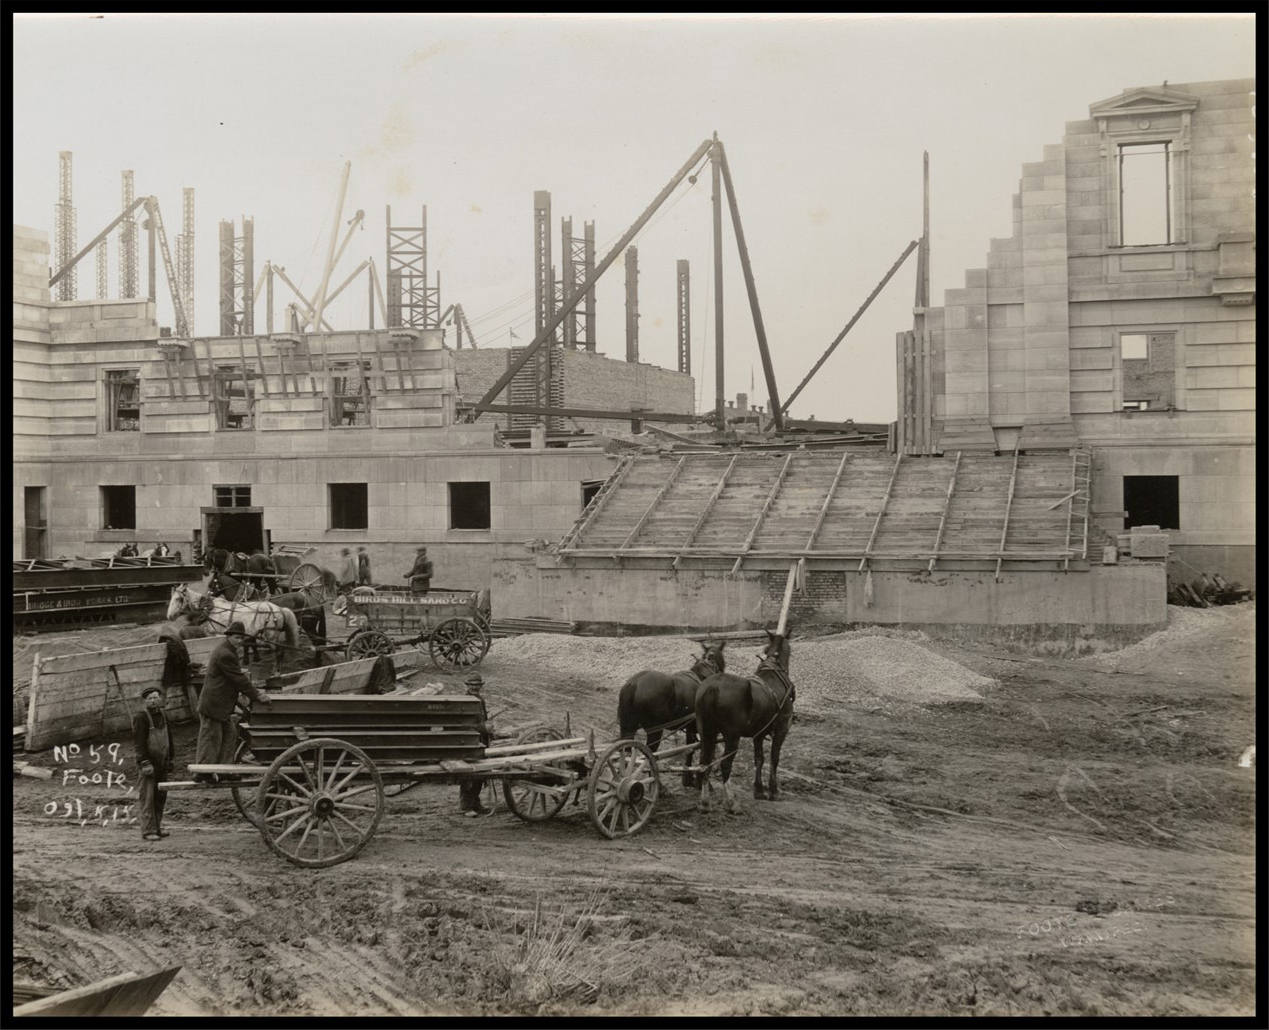 Photo of the back of the Legislative Building, with the walls only partially complete. Several men unload materials from horse drawn carriages.